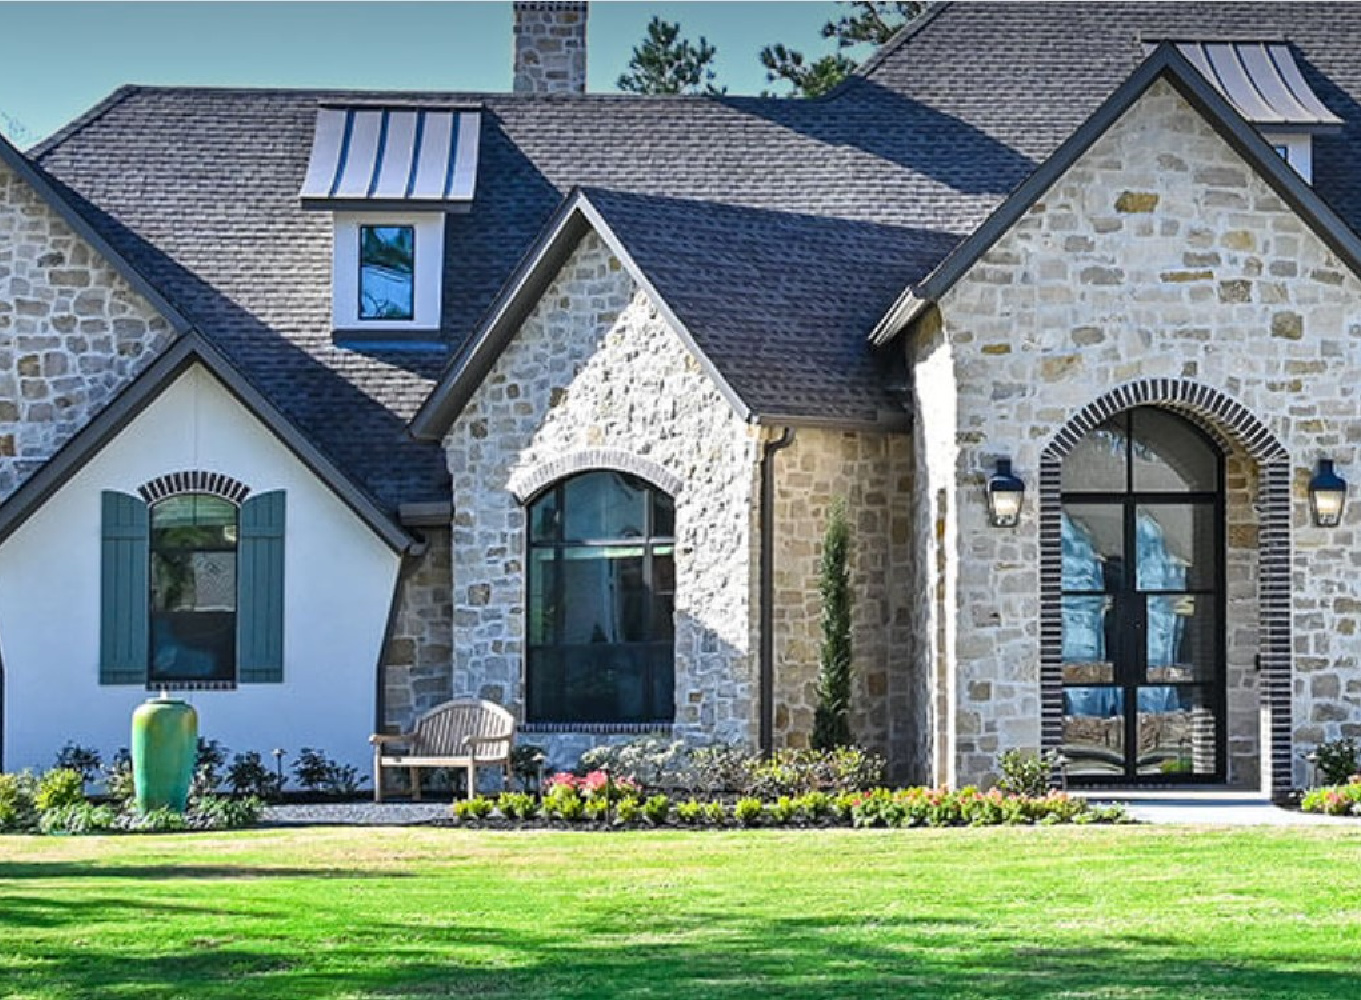 French country exterior by Morningstar Builders. #frenchcountryexterior #frenchcountryhome #homeexteriors